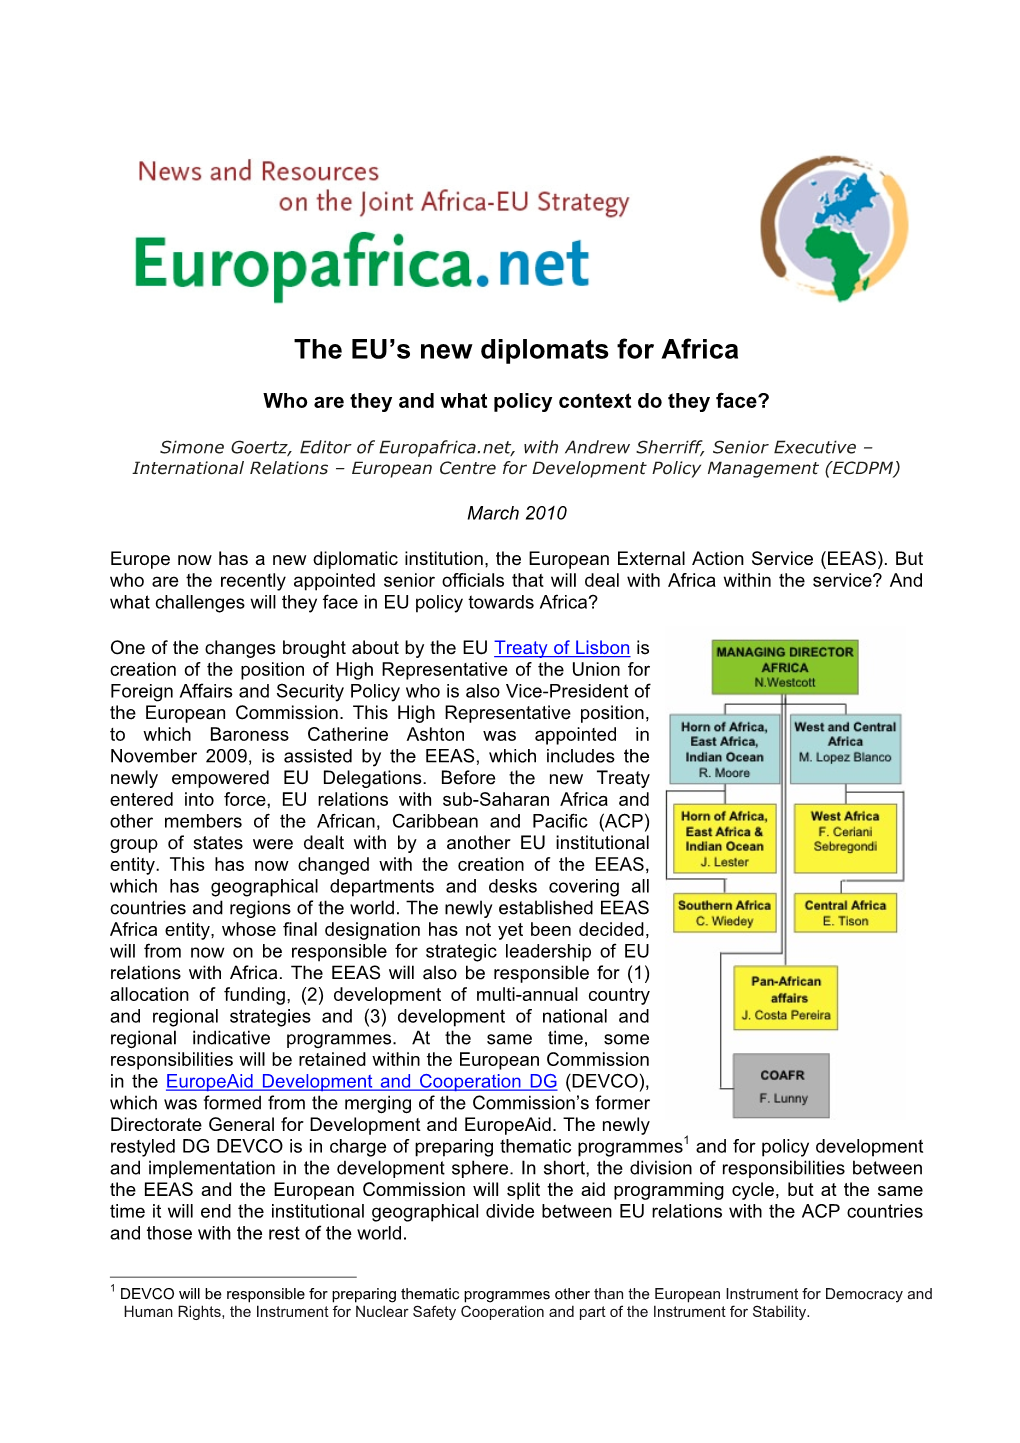 The EU's New Diplomats for Africa As Word Document